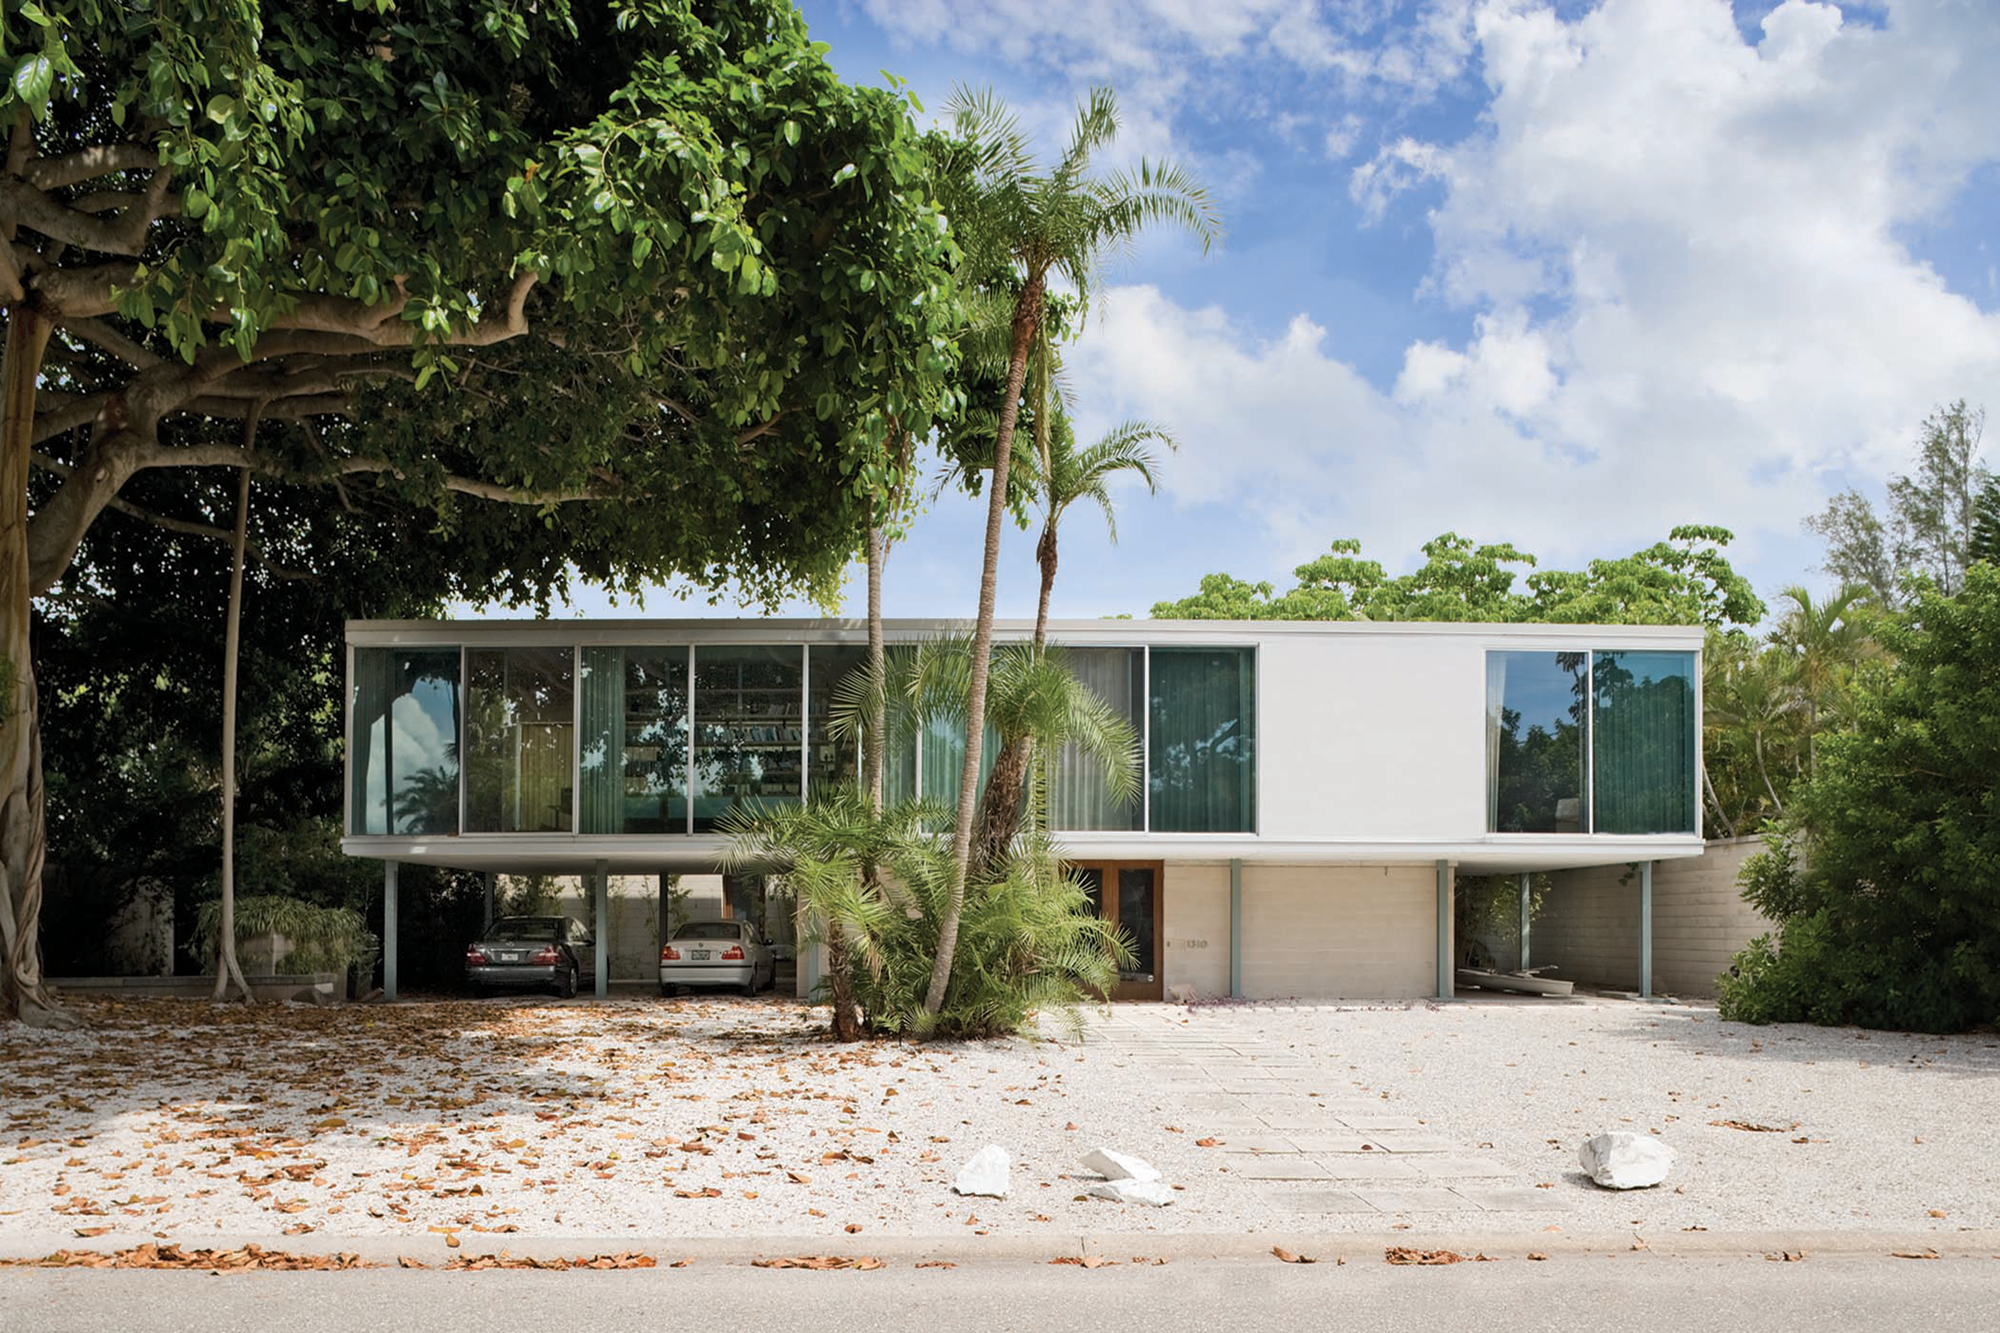 Paul Rudolph’s protégé Tim Seibert designed the Hiss Studio in 1953 as a glass box perched on 14 steel columns, with a massive library on the upper level. It was one of the first air-conditioned buildings in Sarasota. (Courtesy)